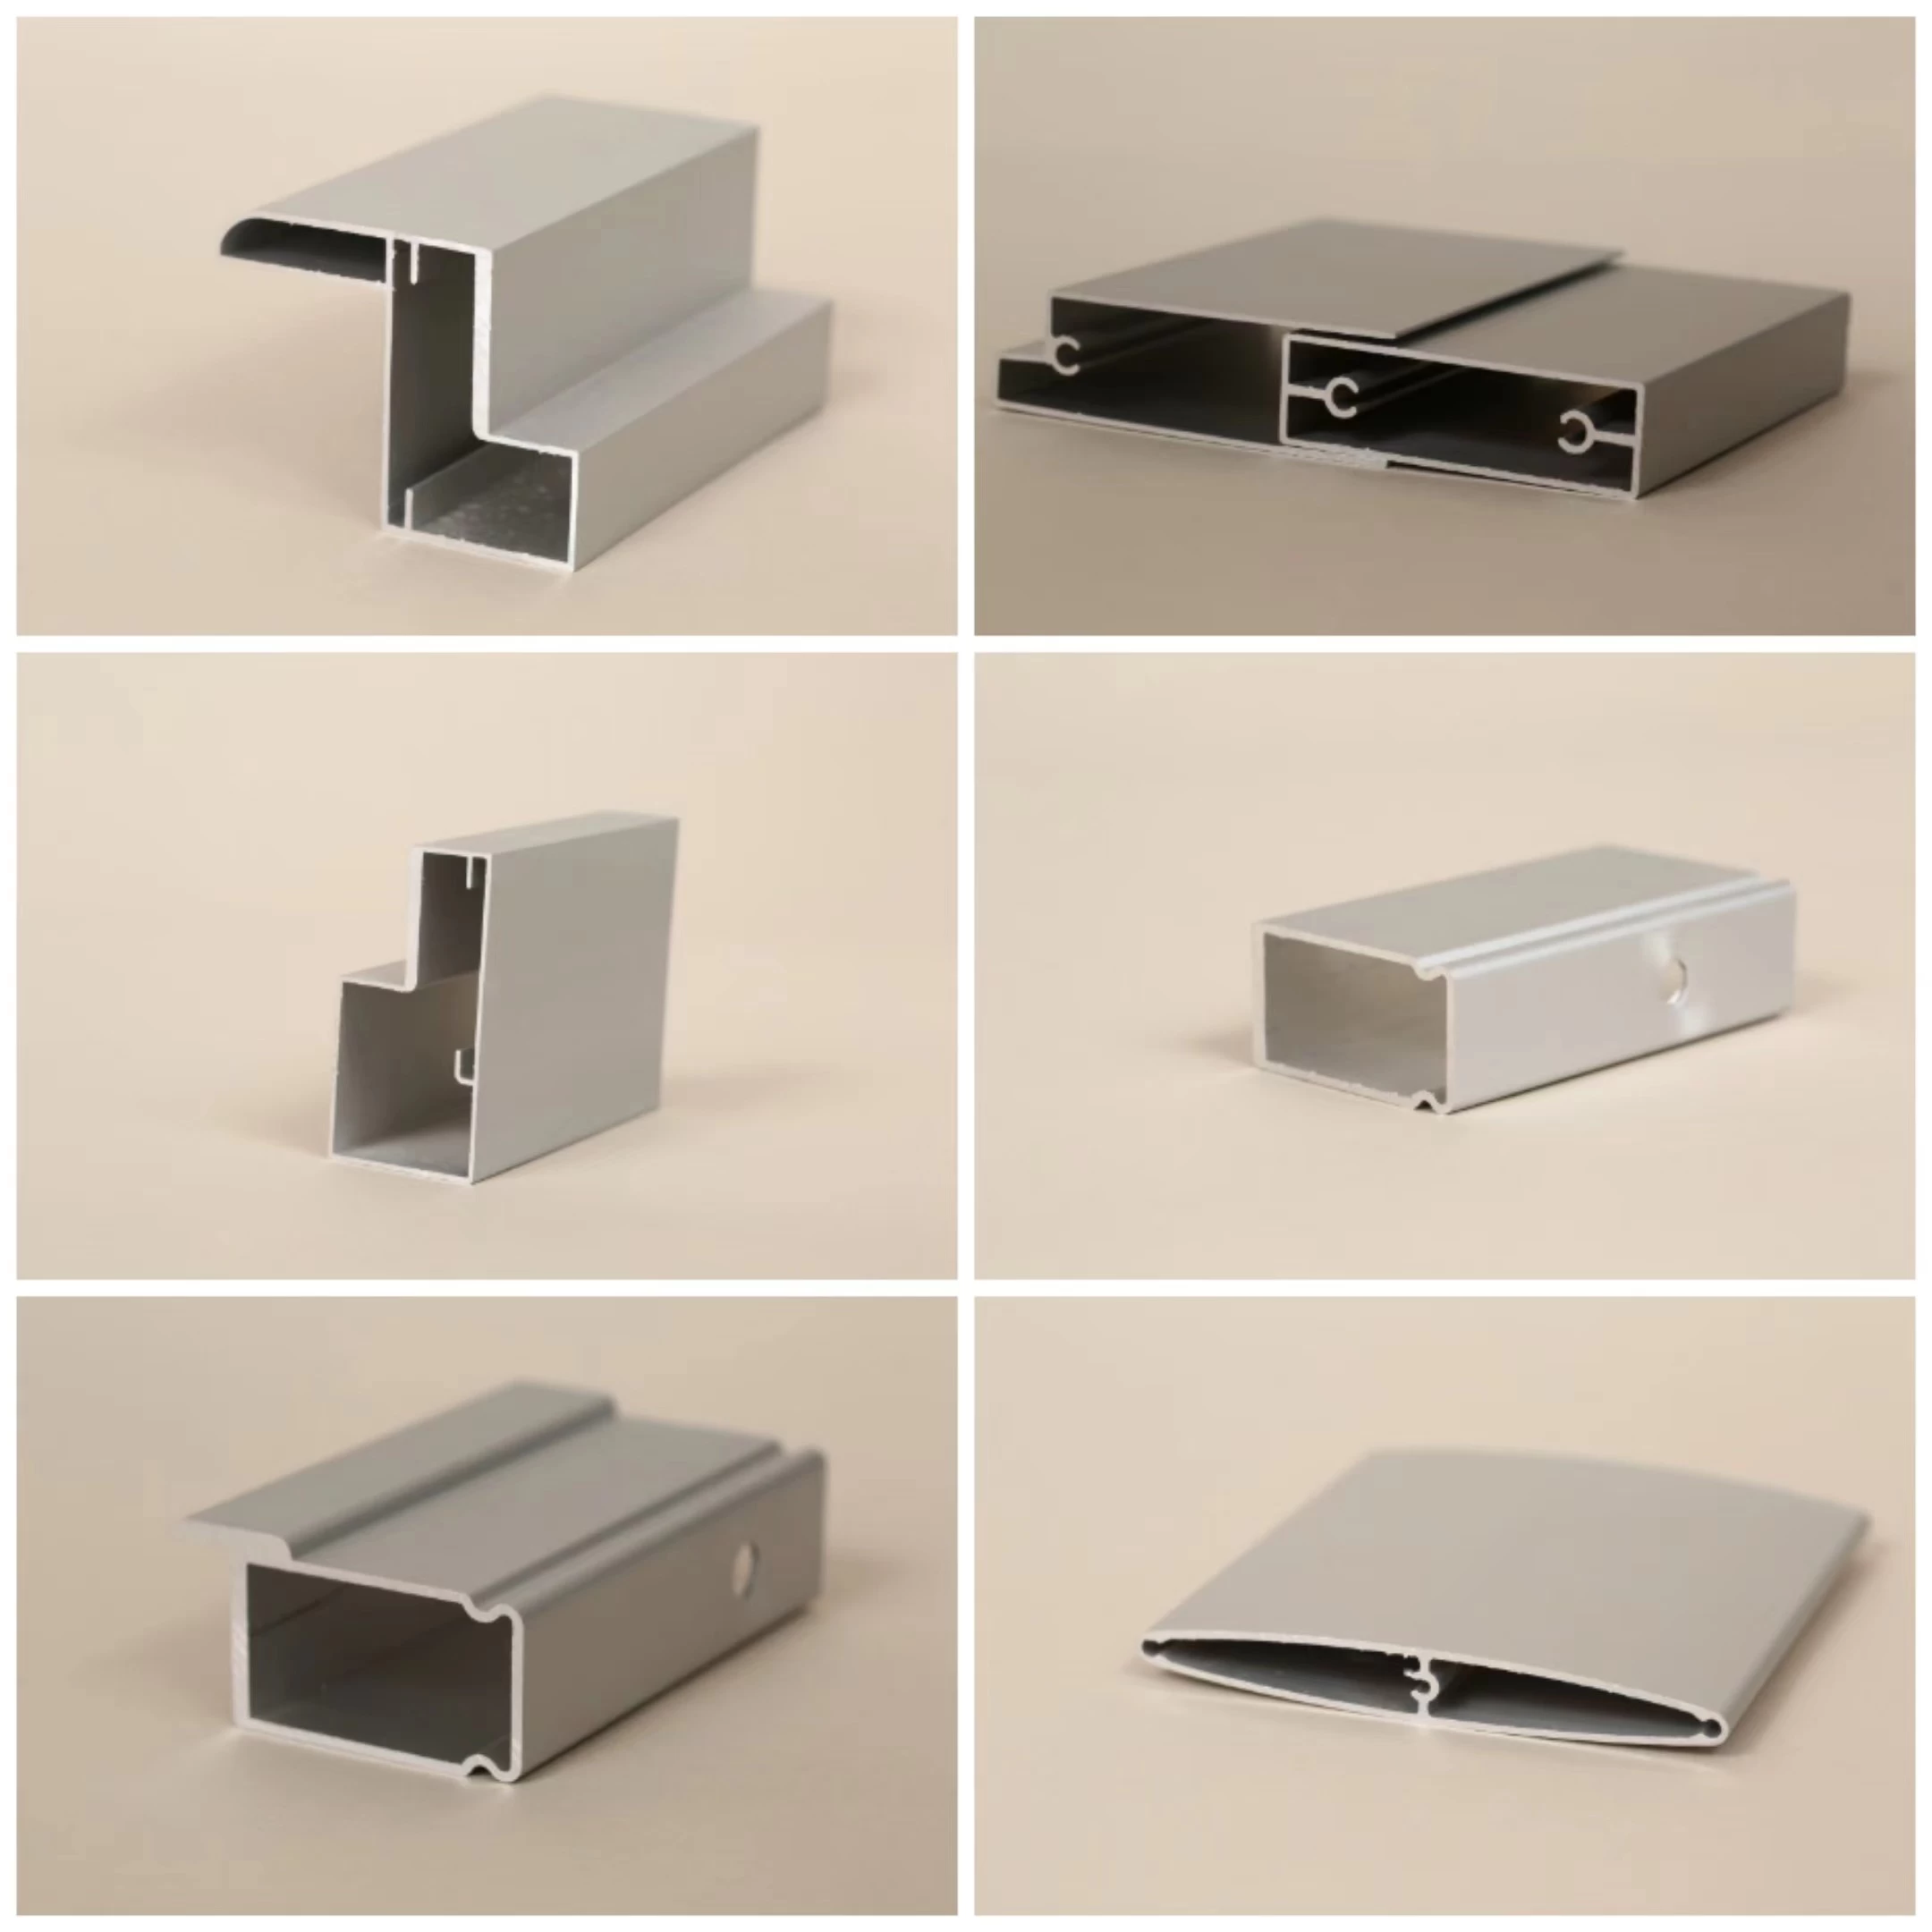 China China Aluminum Shutter components Supplier, Aluminum Shutter Factory, Outside and inside Aluminum Shutter Components manufacturer